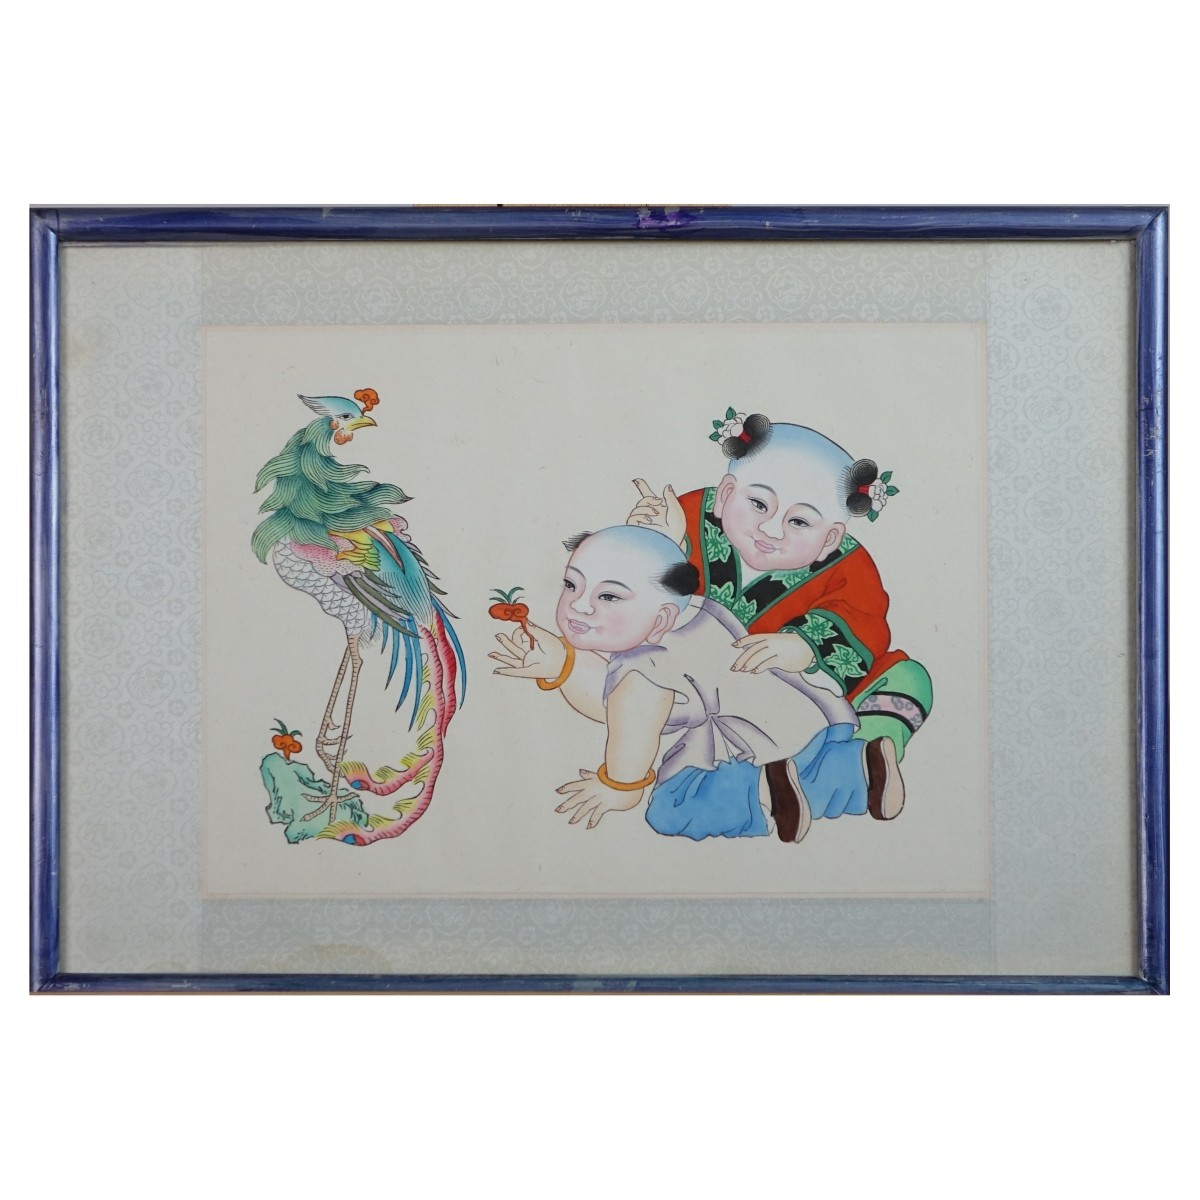 Pair of Chinese Scroll Paintings